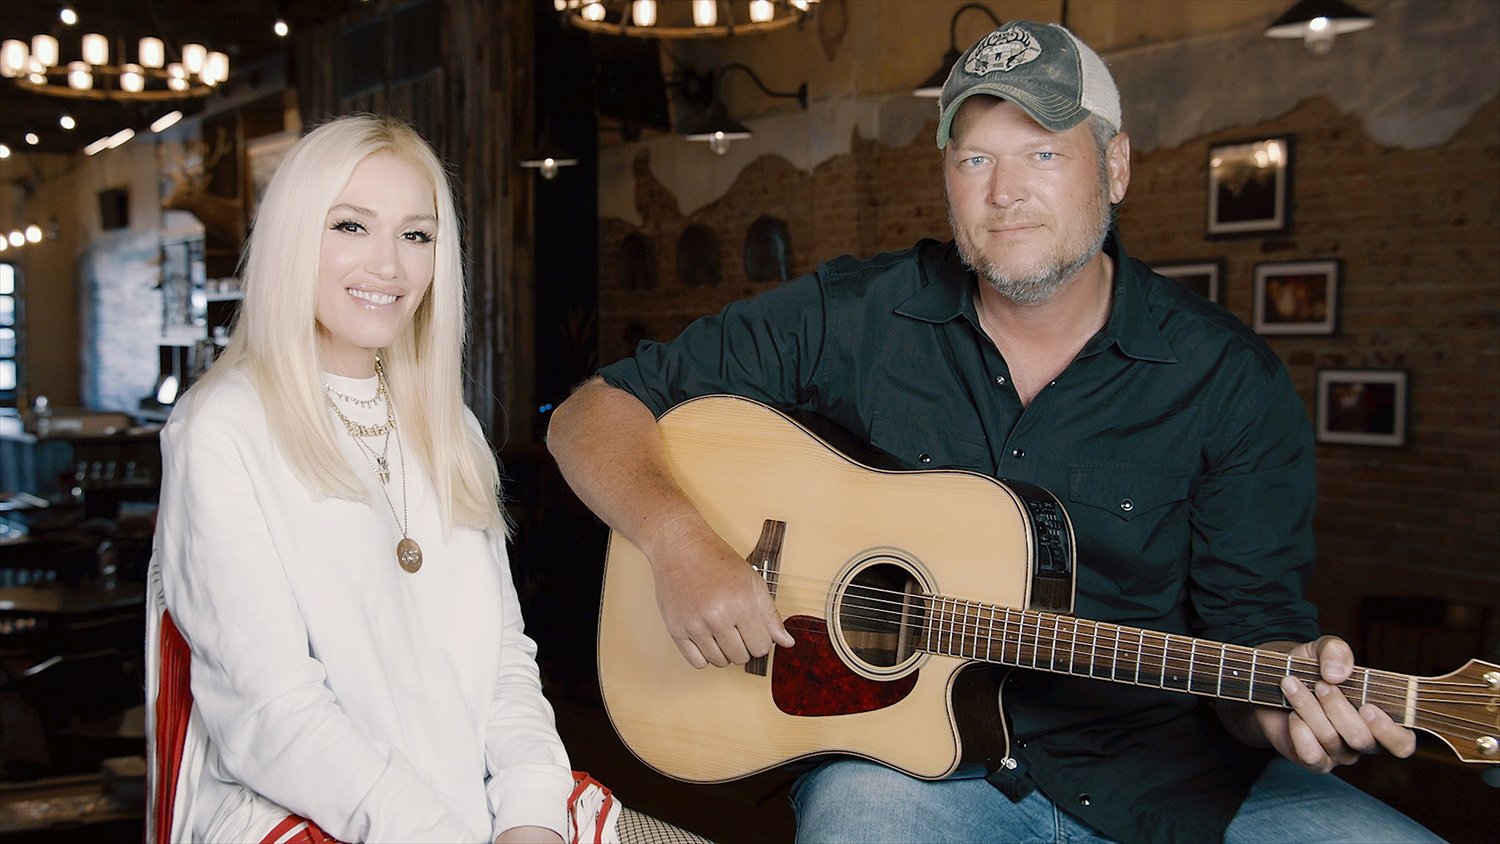 Gwen Stefani and Blake Shelton in 'The Red Nose Day Special' Season 6